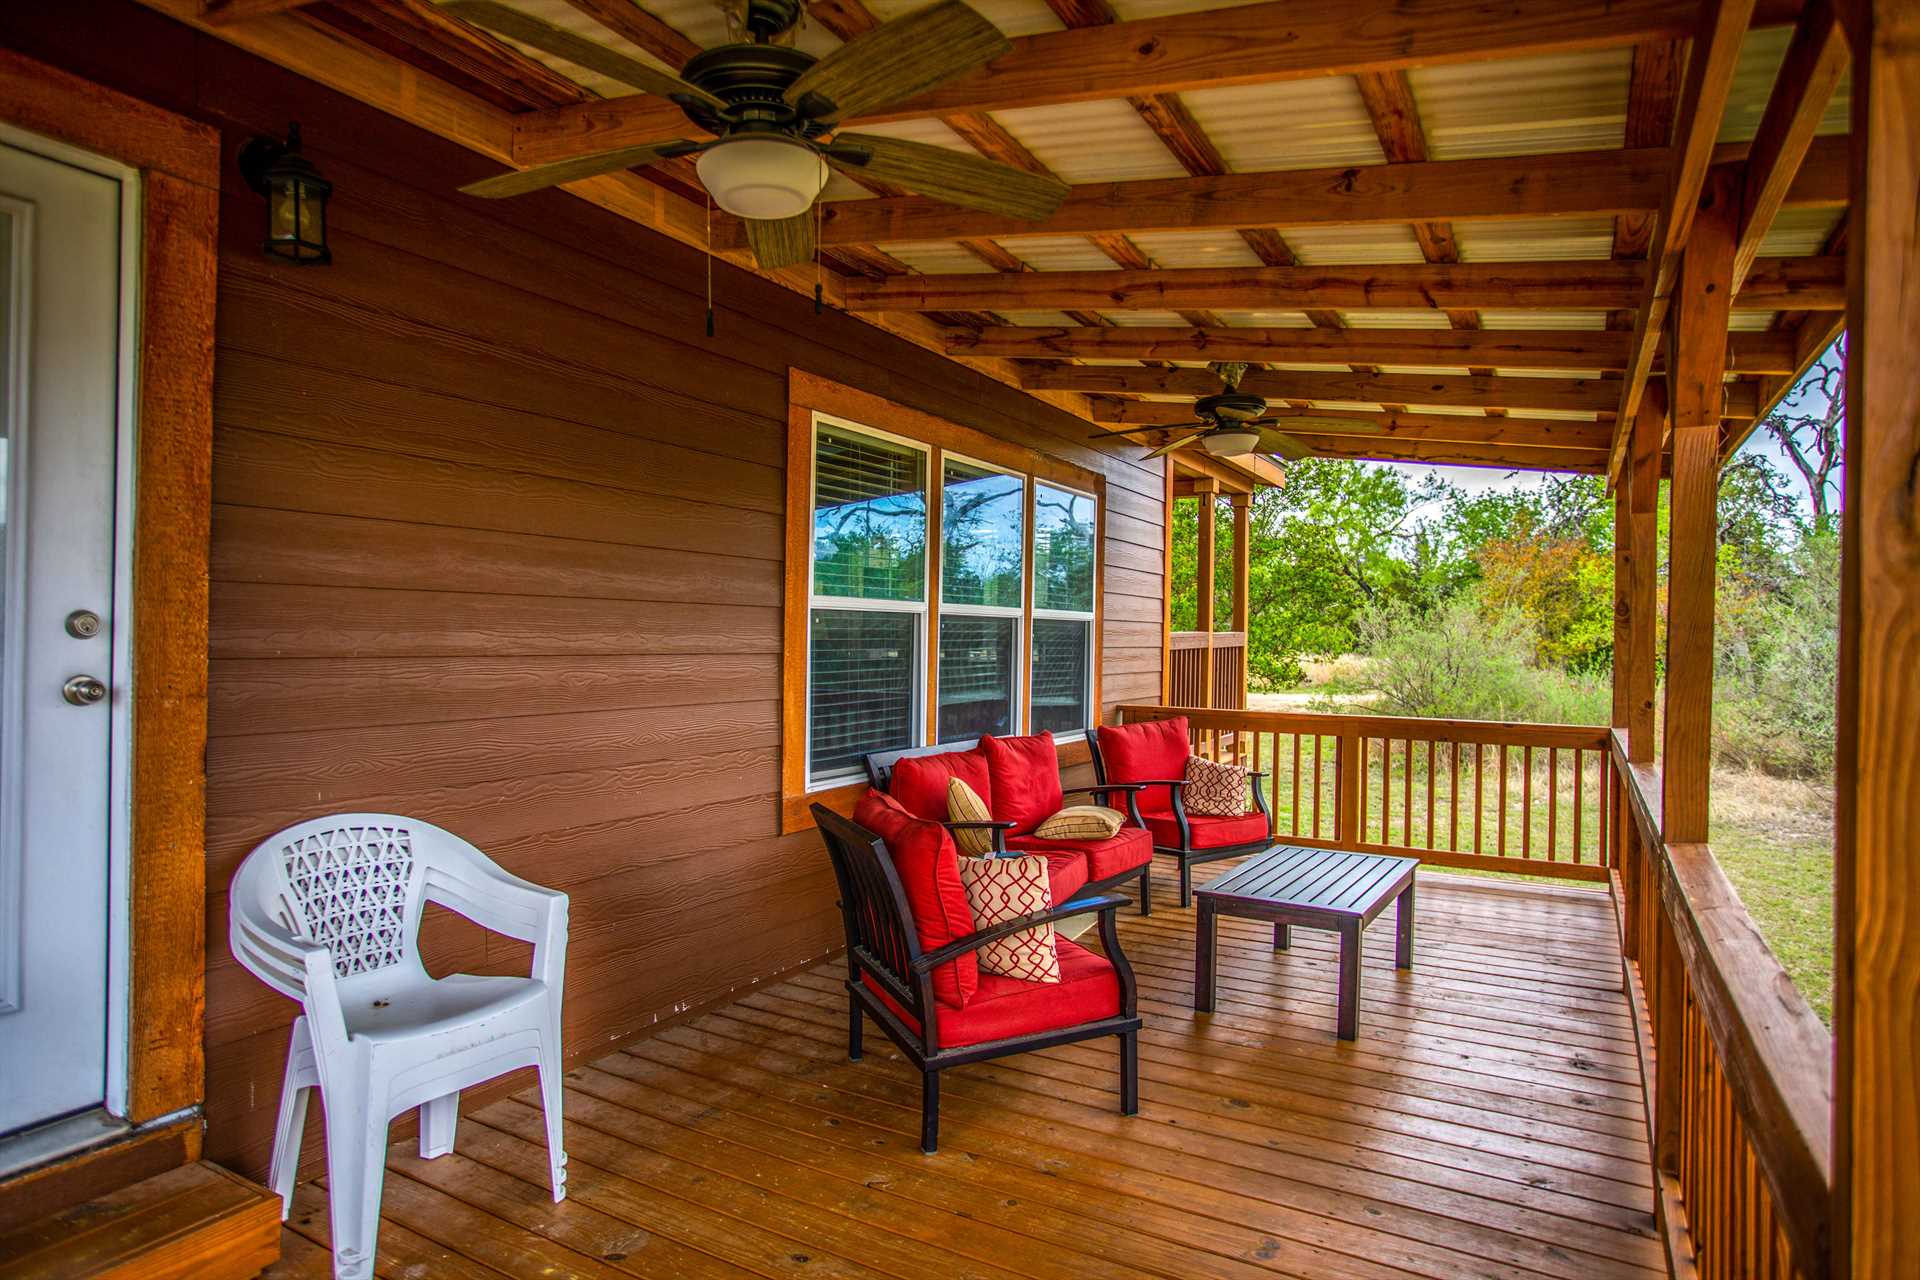                                                 Have a seat in cushioned comfort on the deck, and set the ceiling fans spinning for a cool breeze!